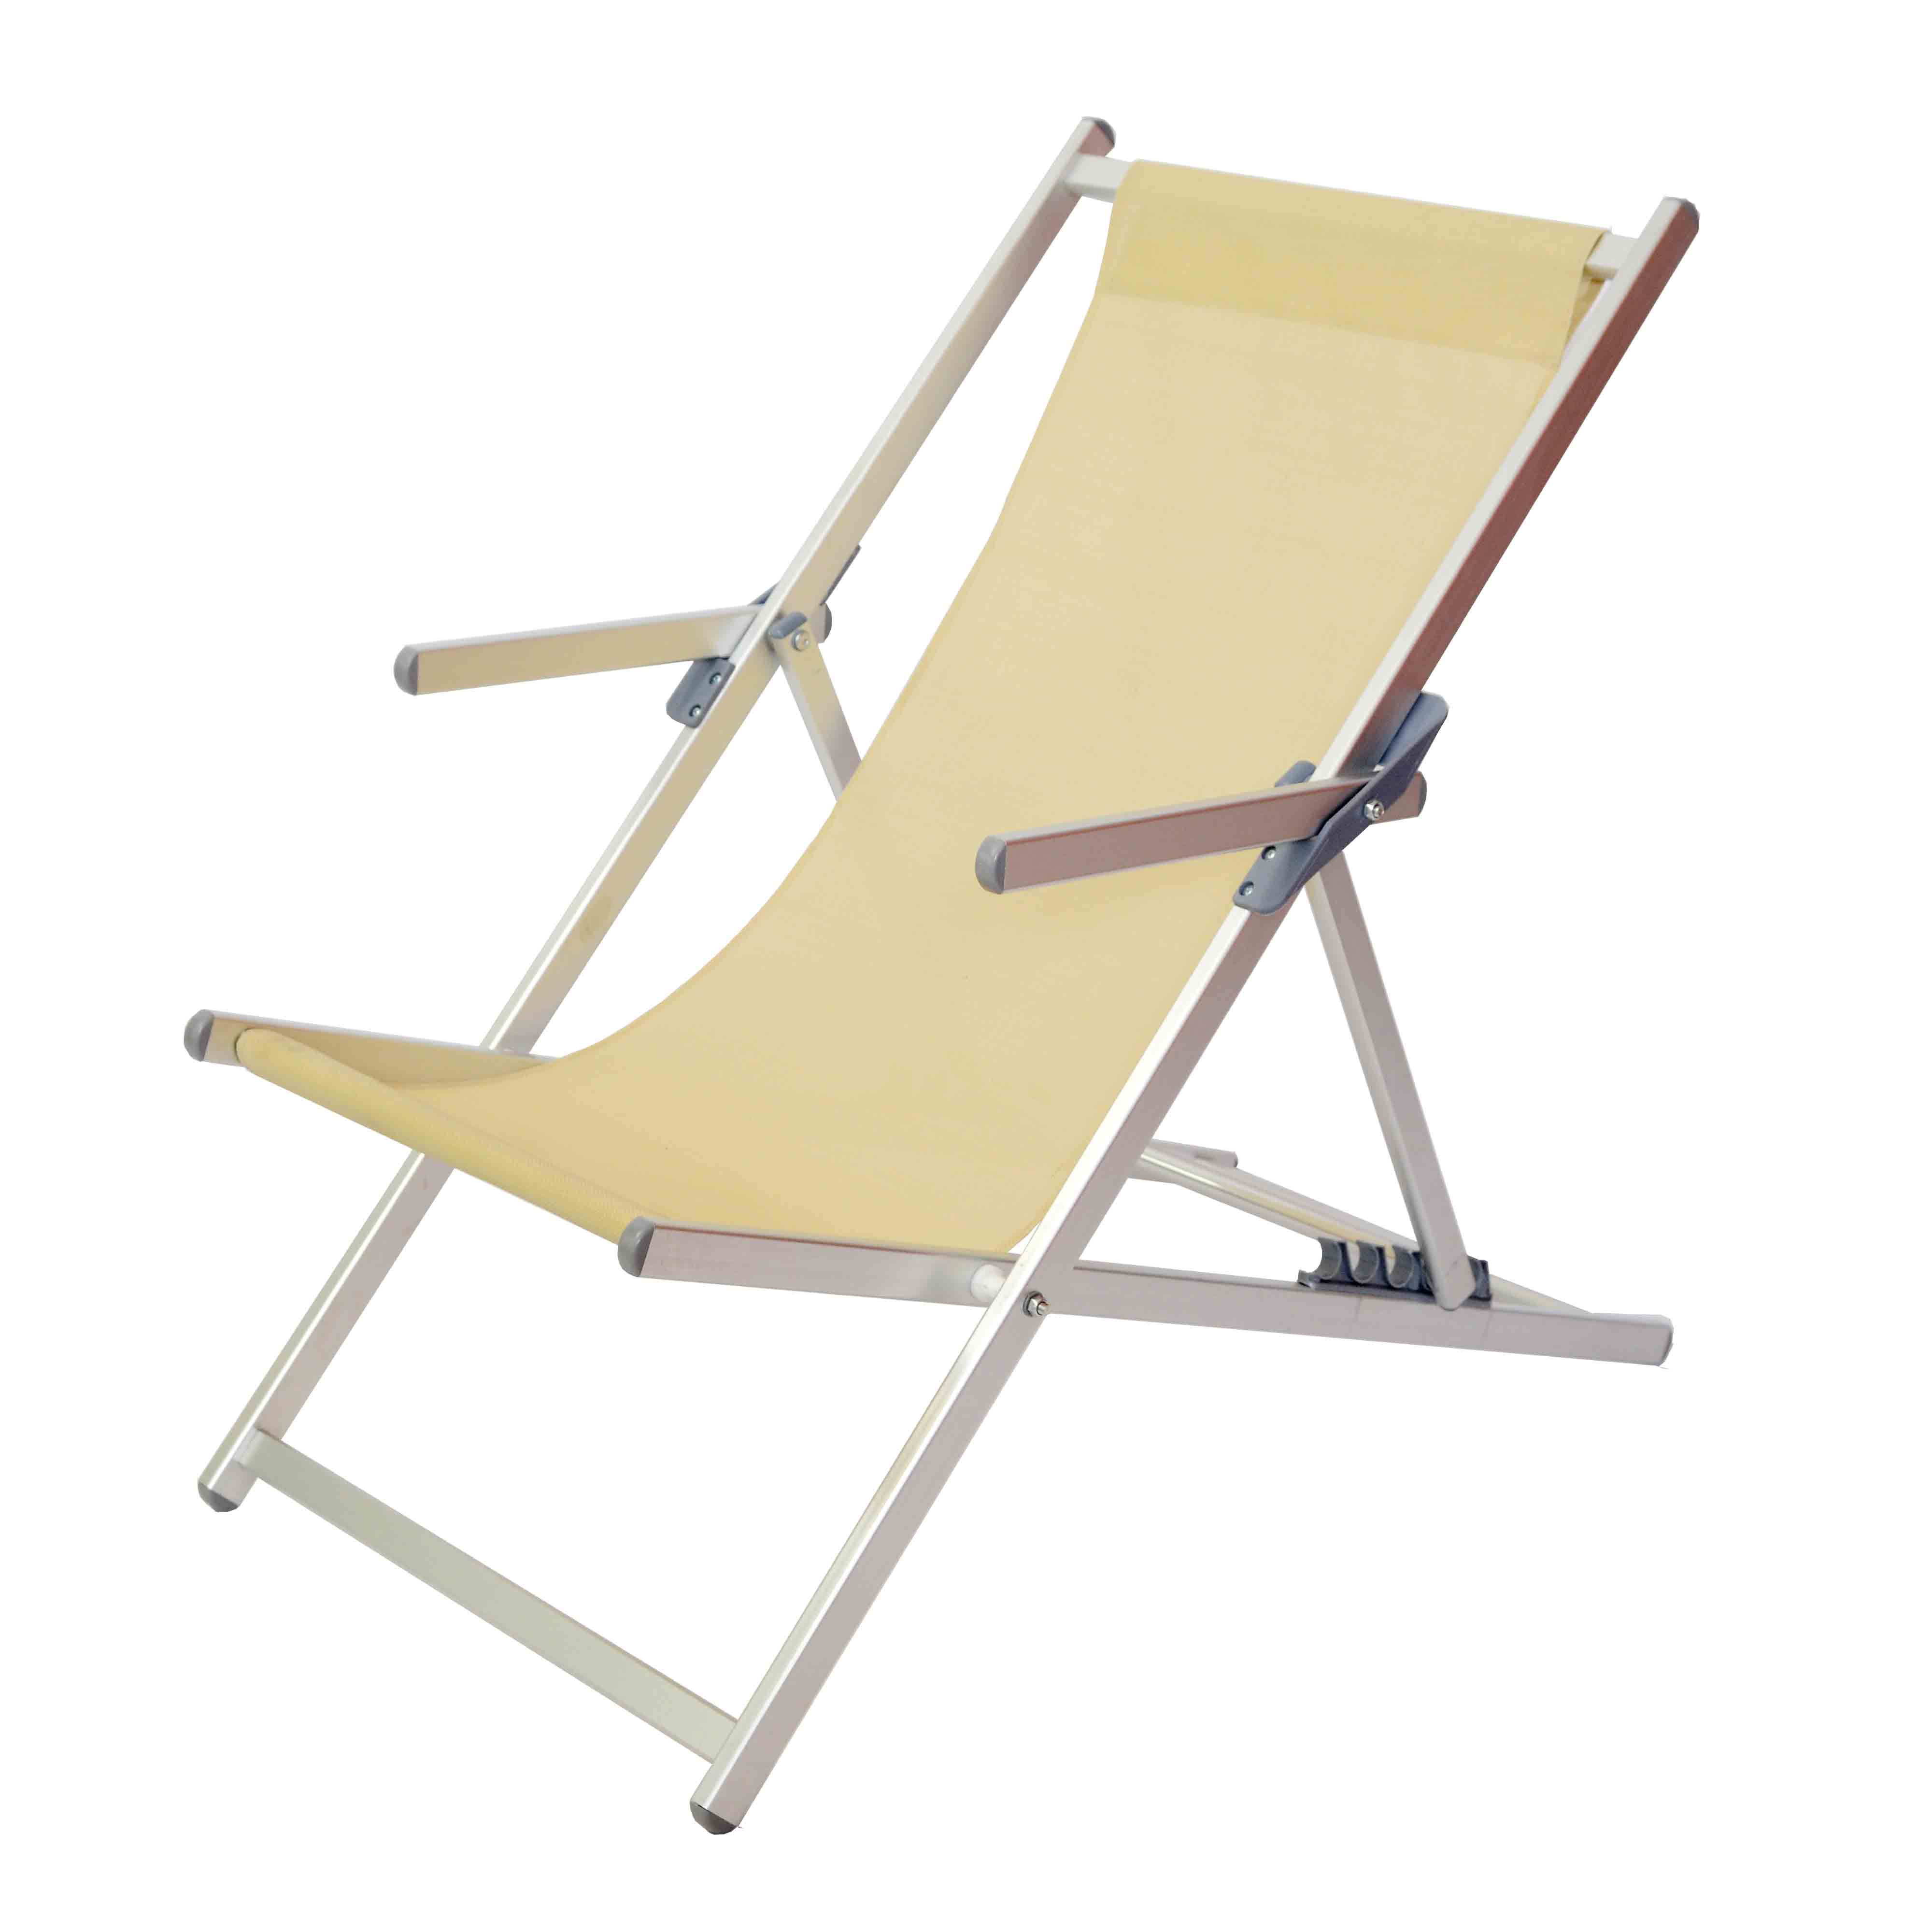 Famous Discount Plastic Garden Chair Products - JJLXS-036 Aluminum camping folding chair – Jin-jiang Industry